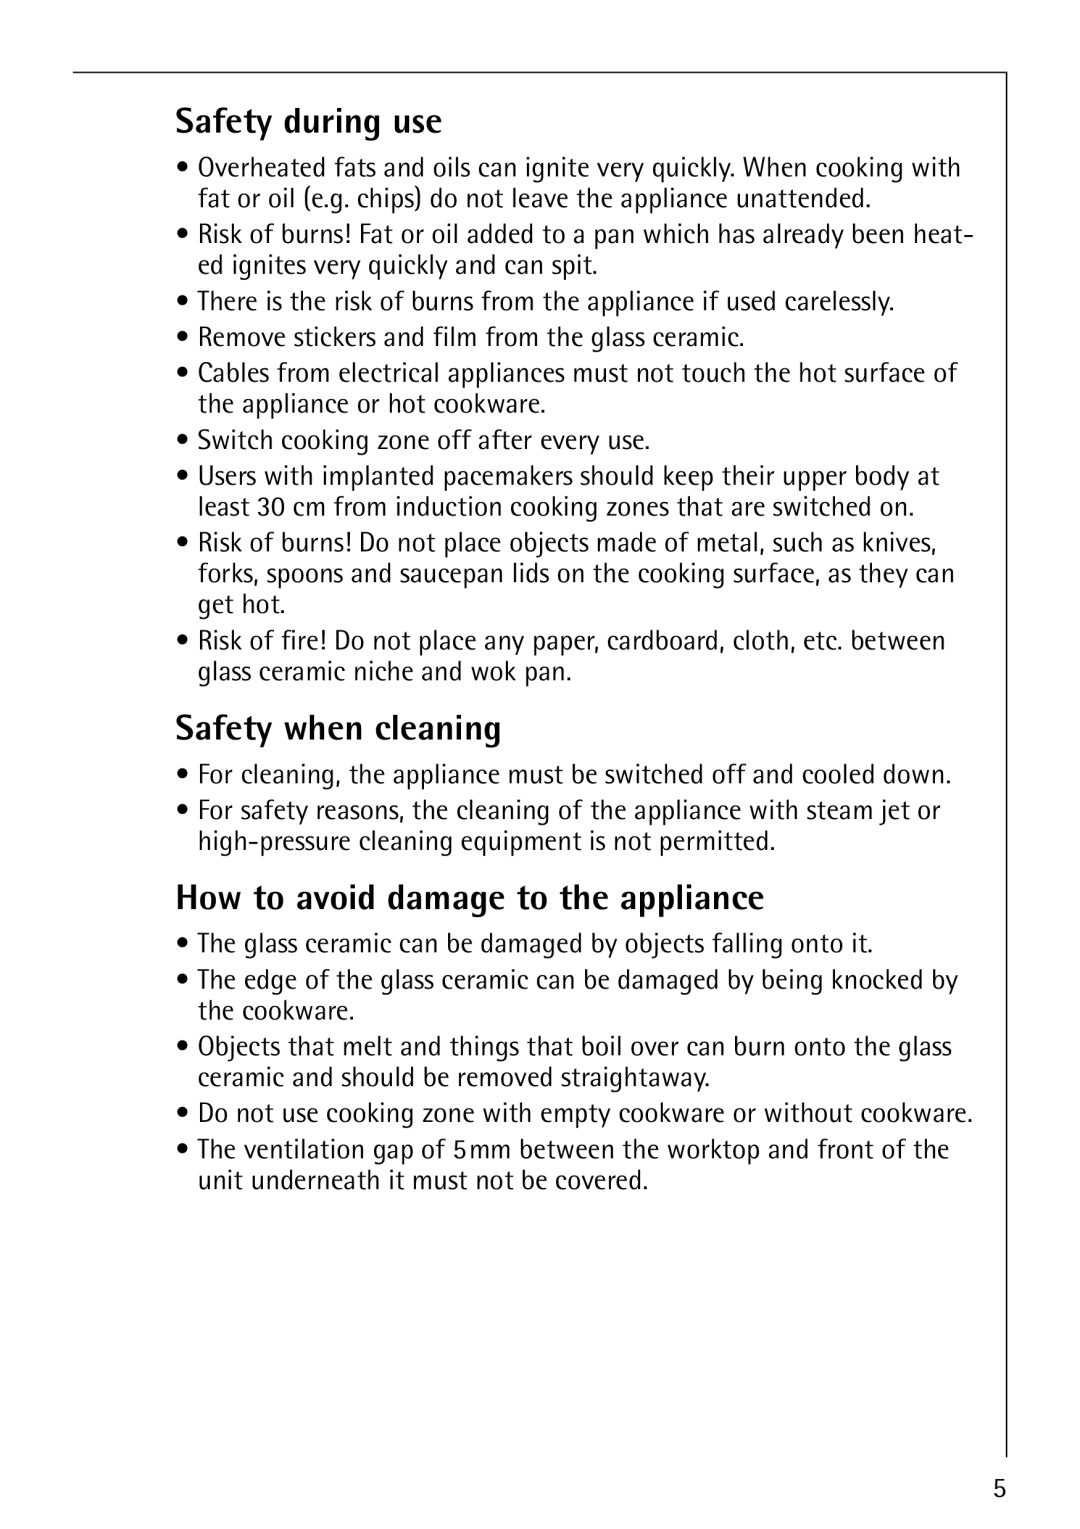 Electrolux FM4863-an manual Safety during use, Safety when cleaning, How to avoid damage to the appliance 